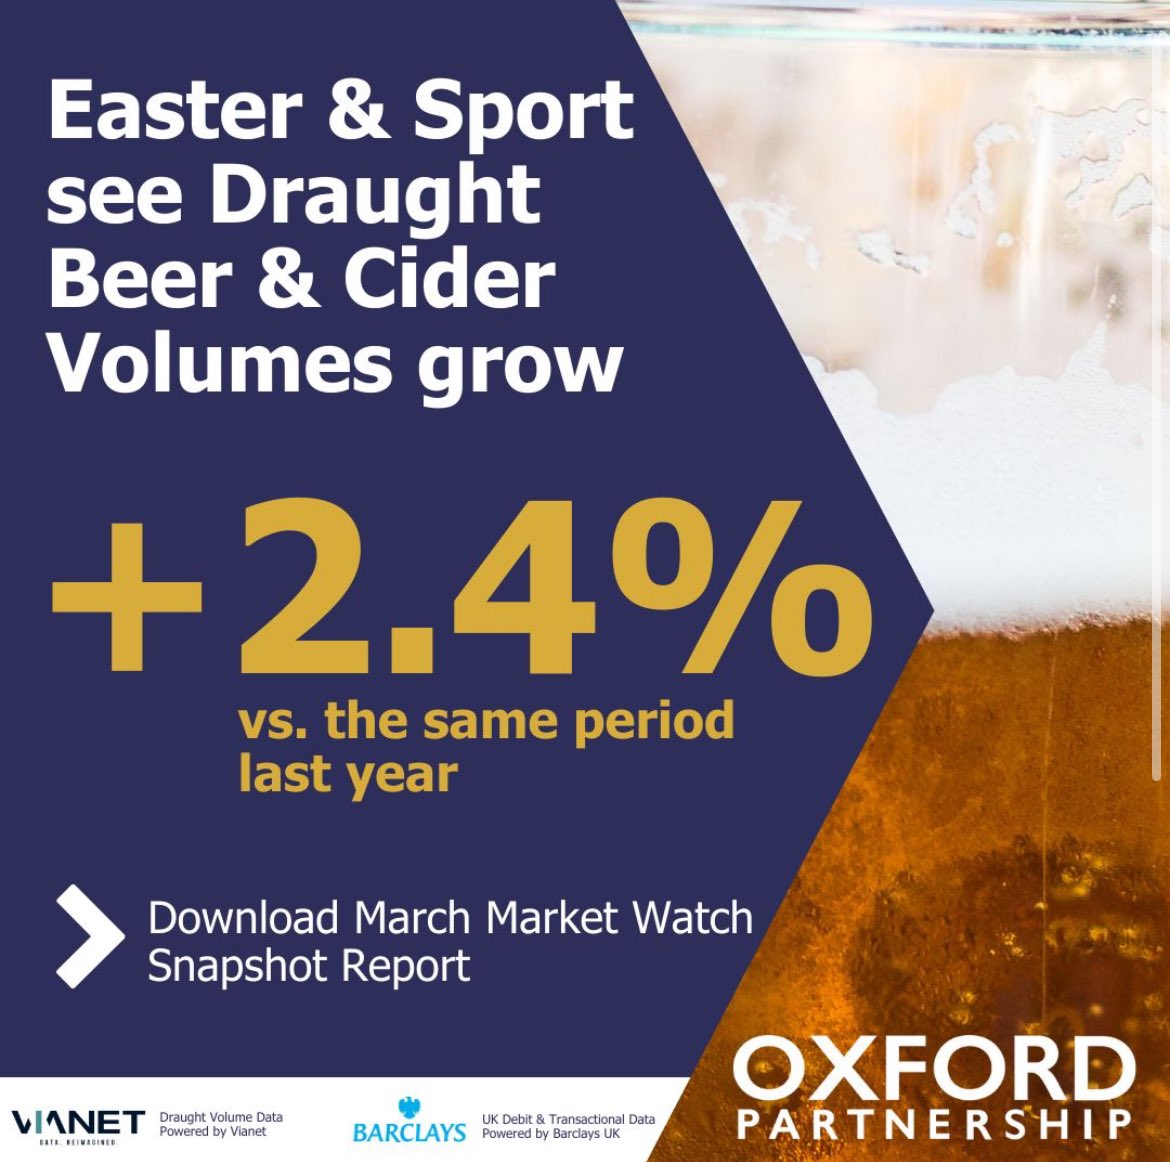 Easter drove some cheer for the UK hospitality industry, finishing the first quarter of the year on a positive note.
Download the full March report: bit.ly/3JuG04B #ontrade #pubs #beernews #hospitalityindustry #hospitality #trends #analysis #vianet #barclaysuk